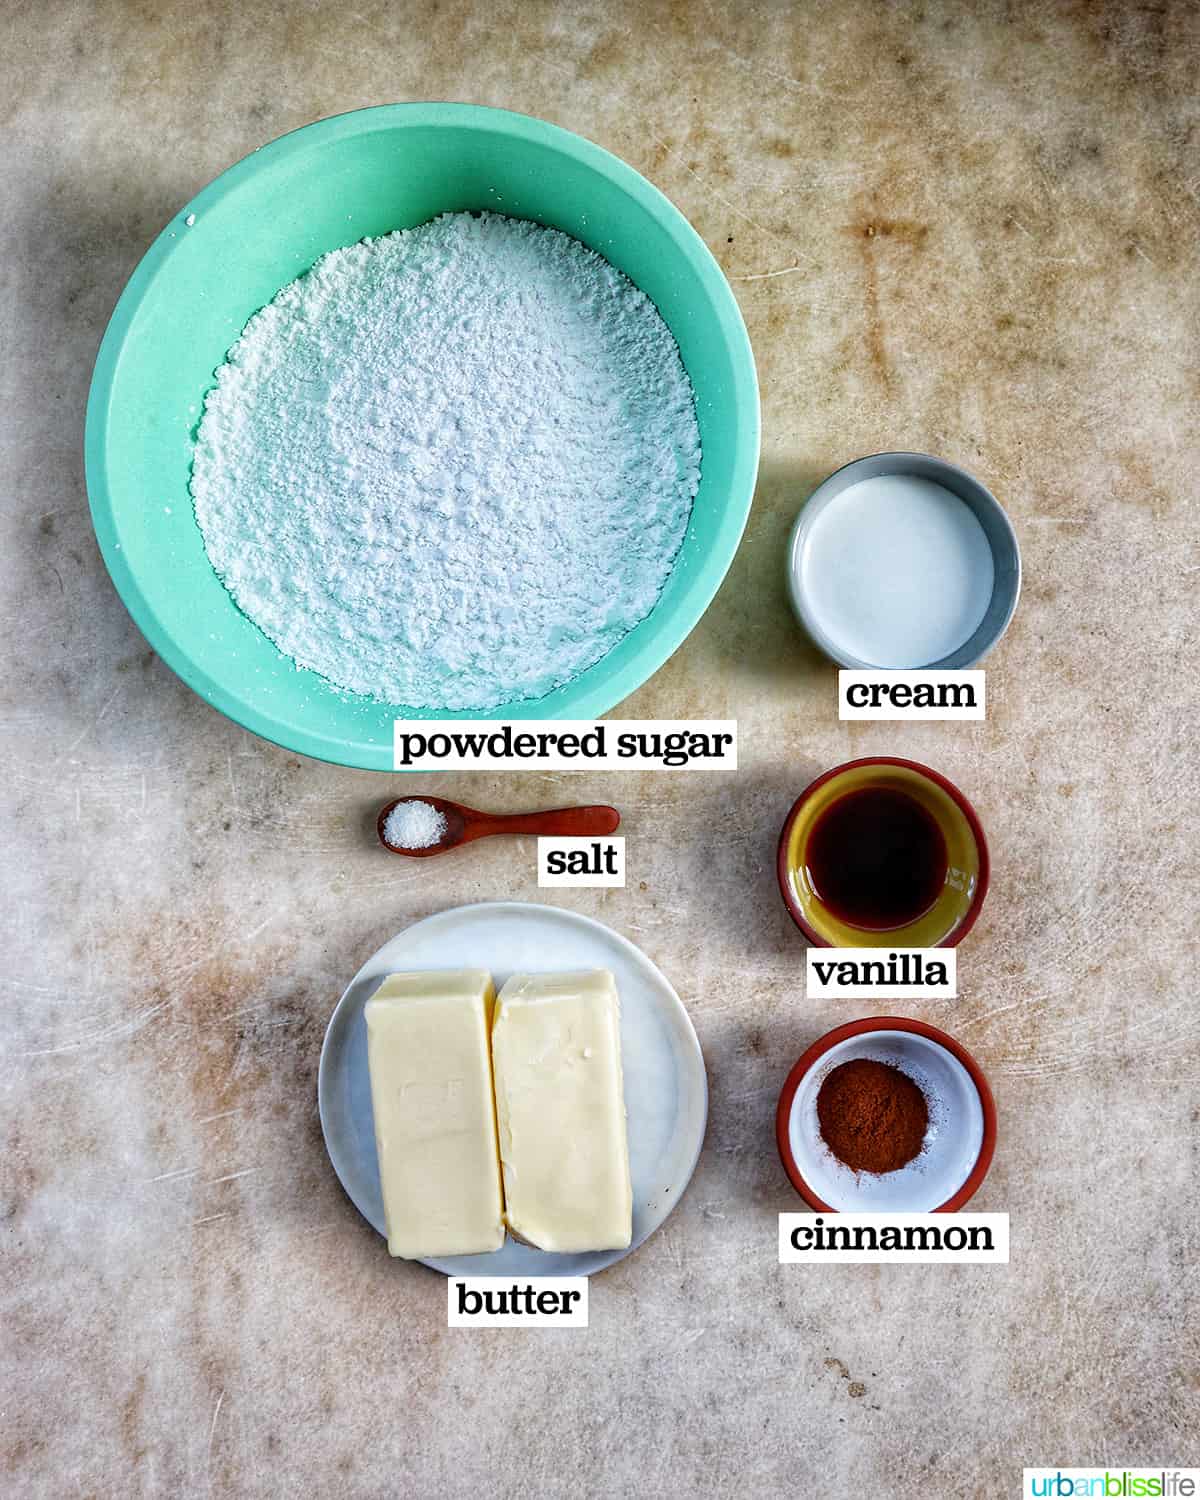 bowls of ingredients to make cinnamon buttercream frosting.